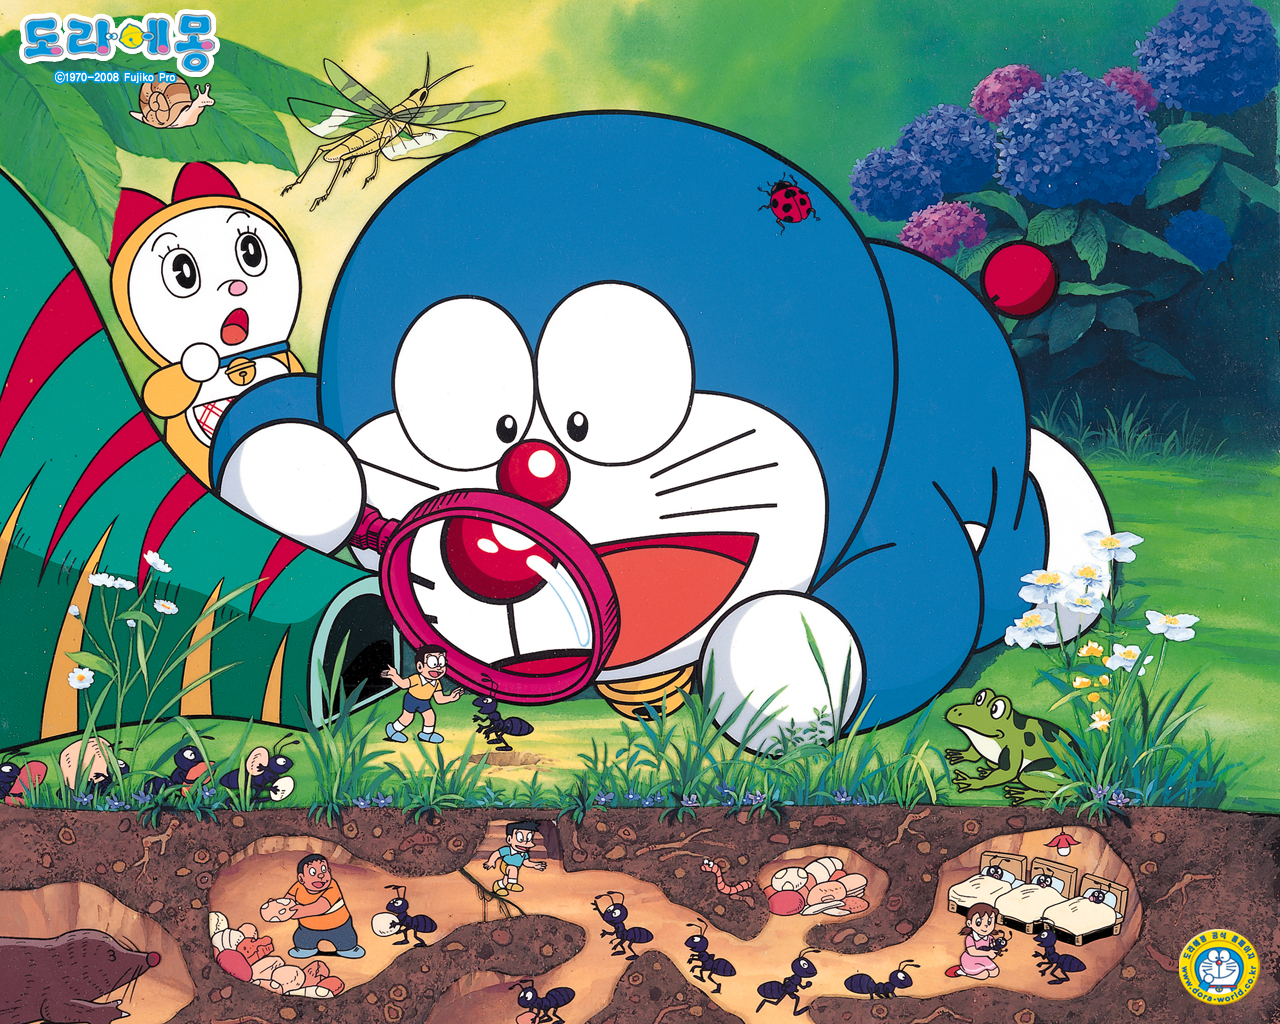 Anime Doraemon Picture - Image Abyss